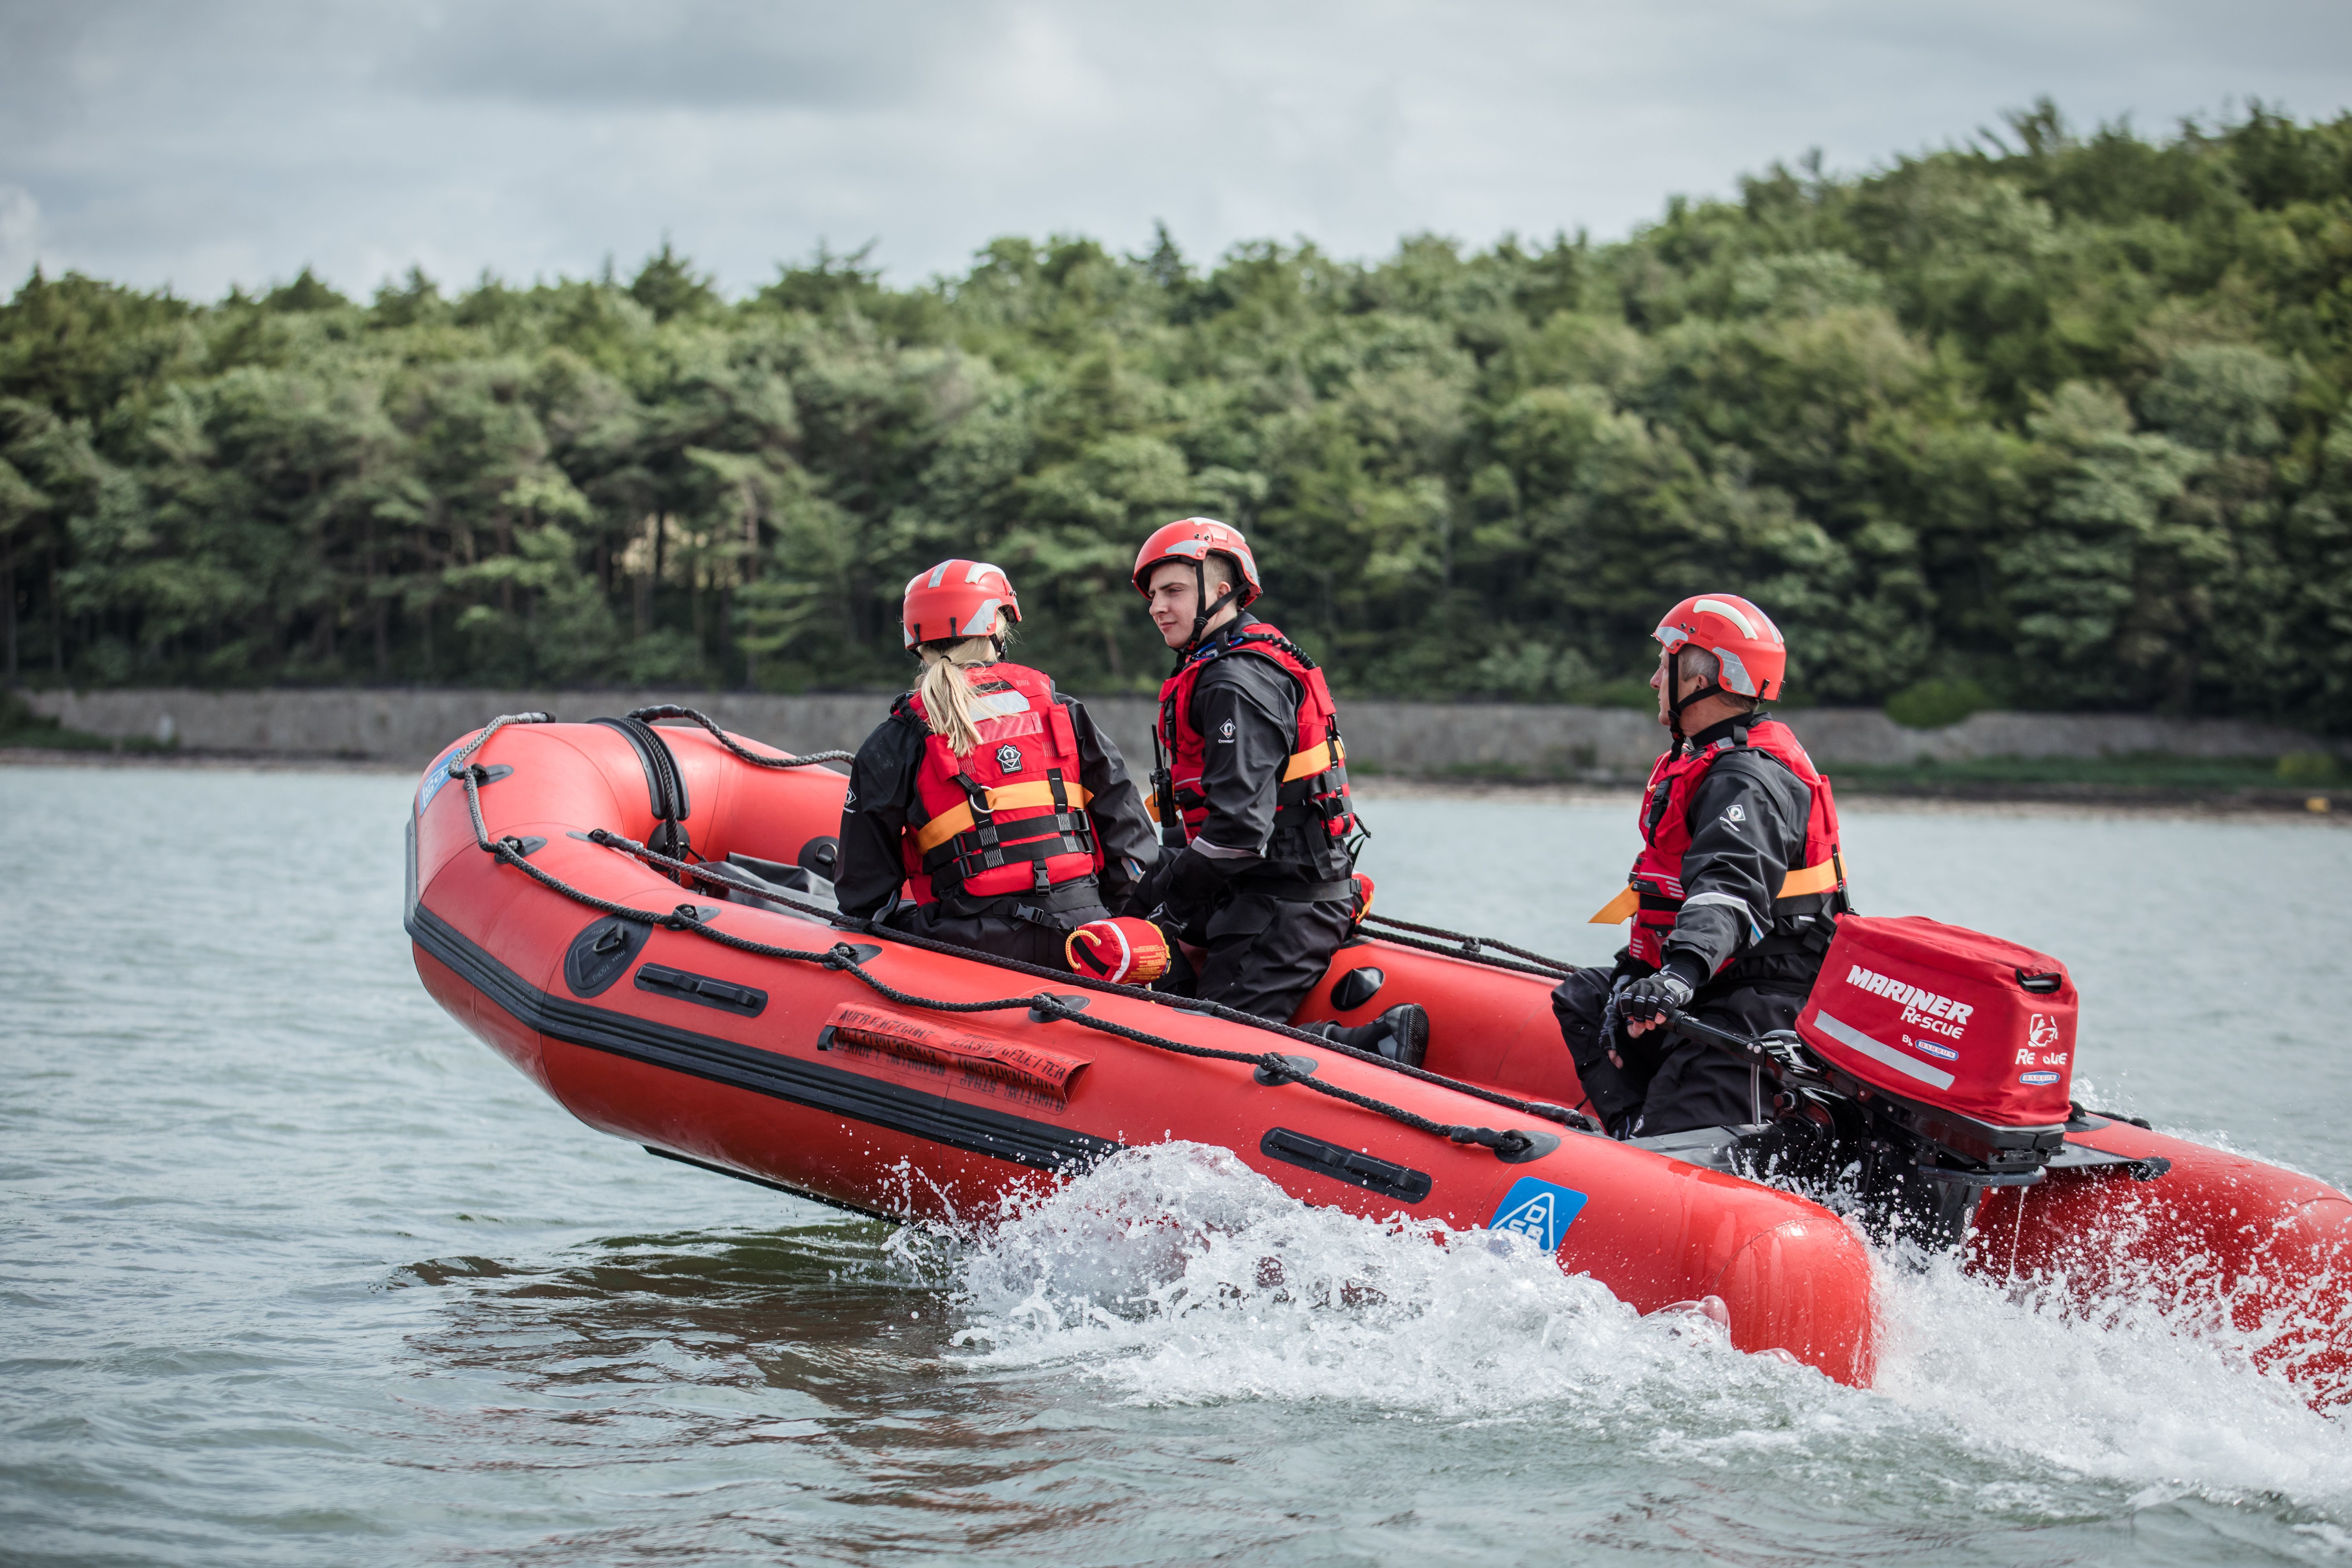 SURVITEC UNVEILS NEW MILITARY GRADE INFLATABLE FAST RESCUE BOAT FOR EMERGENCY SERVICES AND FIRST REPSONDERS